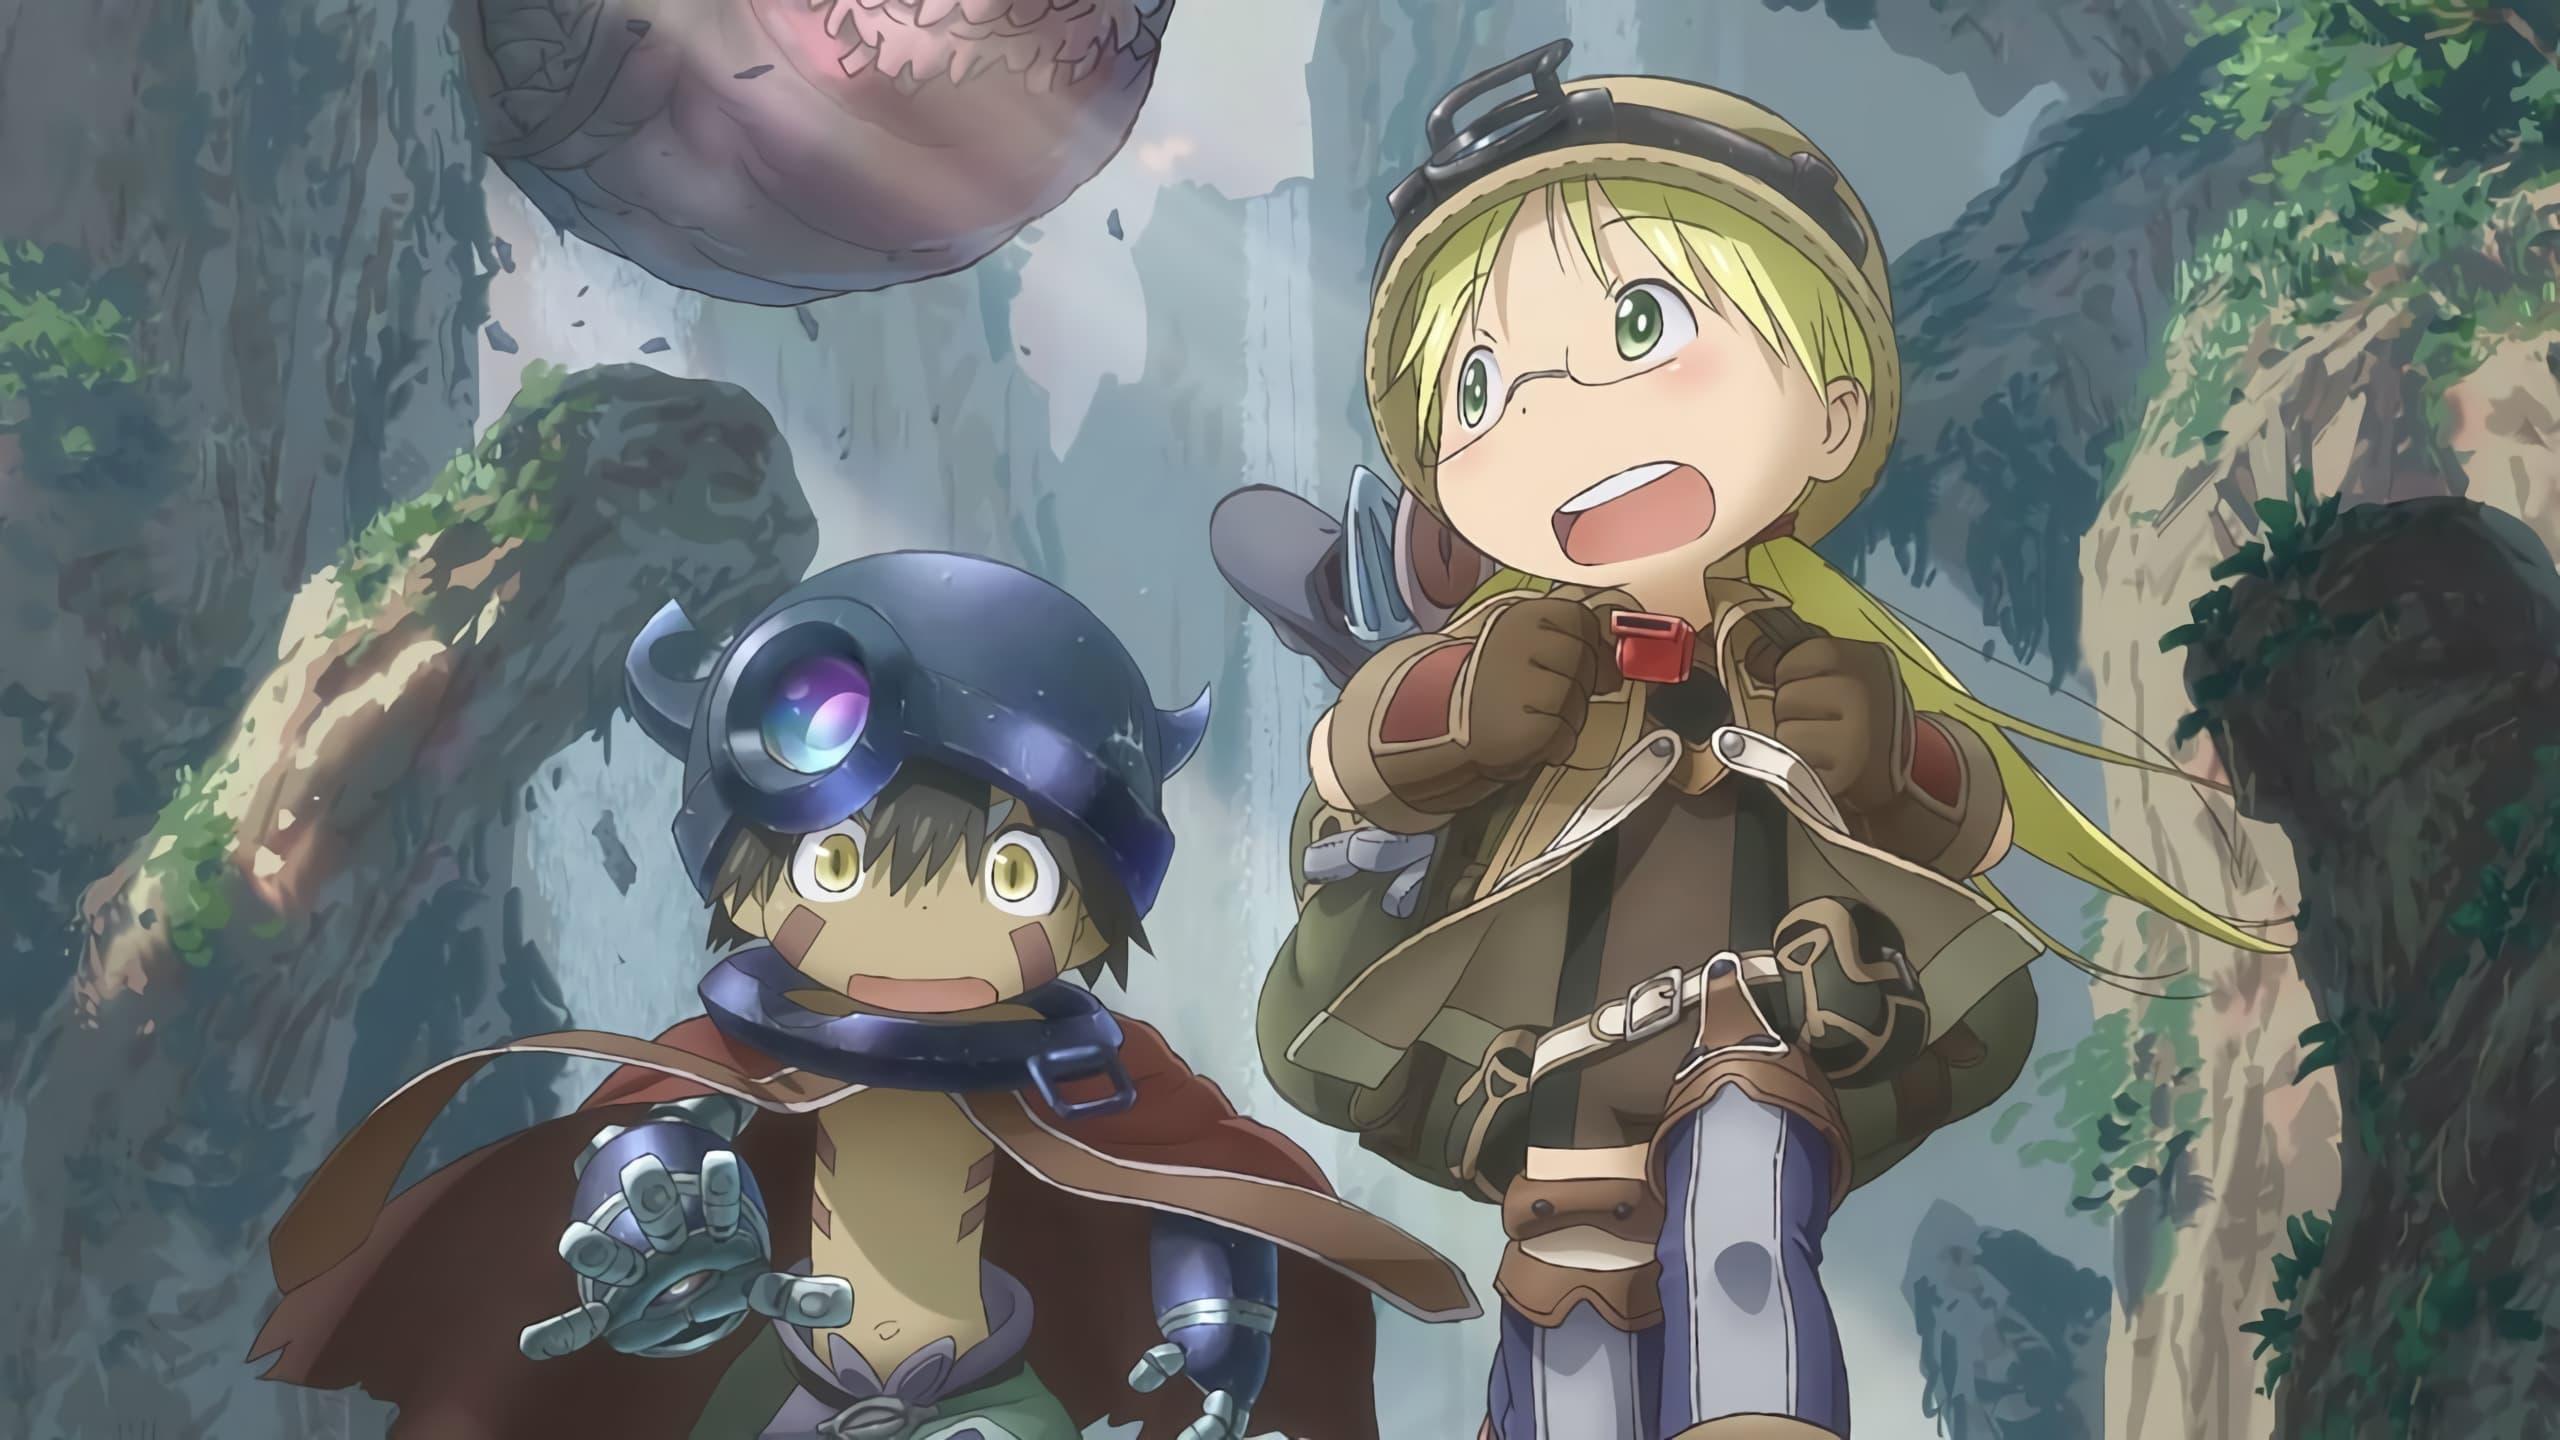 Made in Abyss: Journey's Dawn backdrop